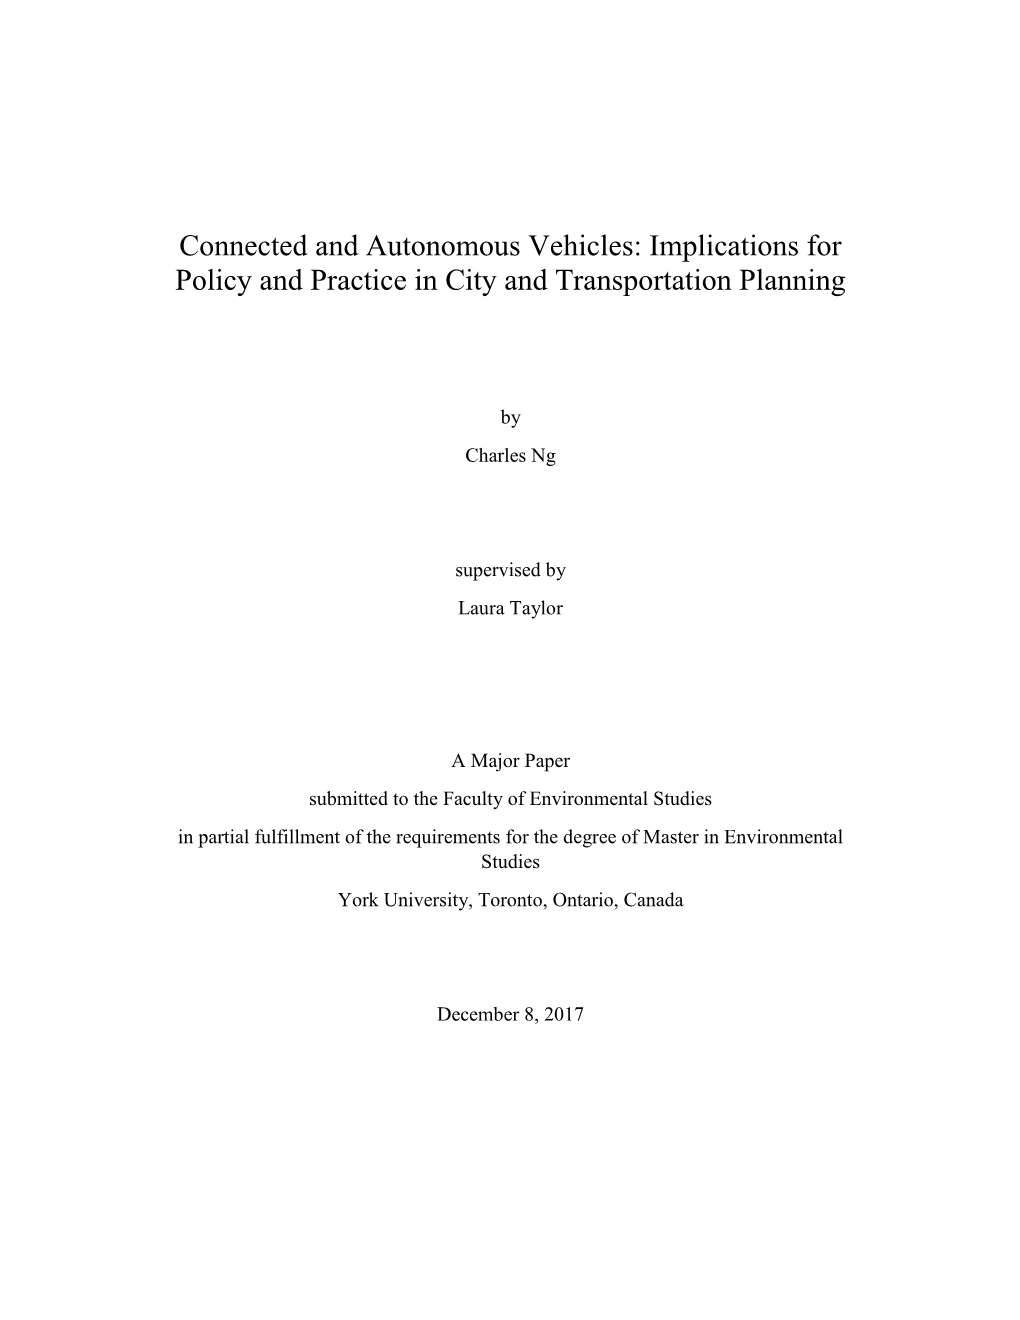 Connected and Autonomous Vehicles: Implications for Policy and Practice in City and Transportation Planning